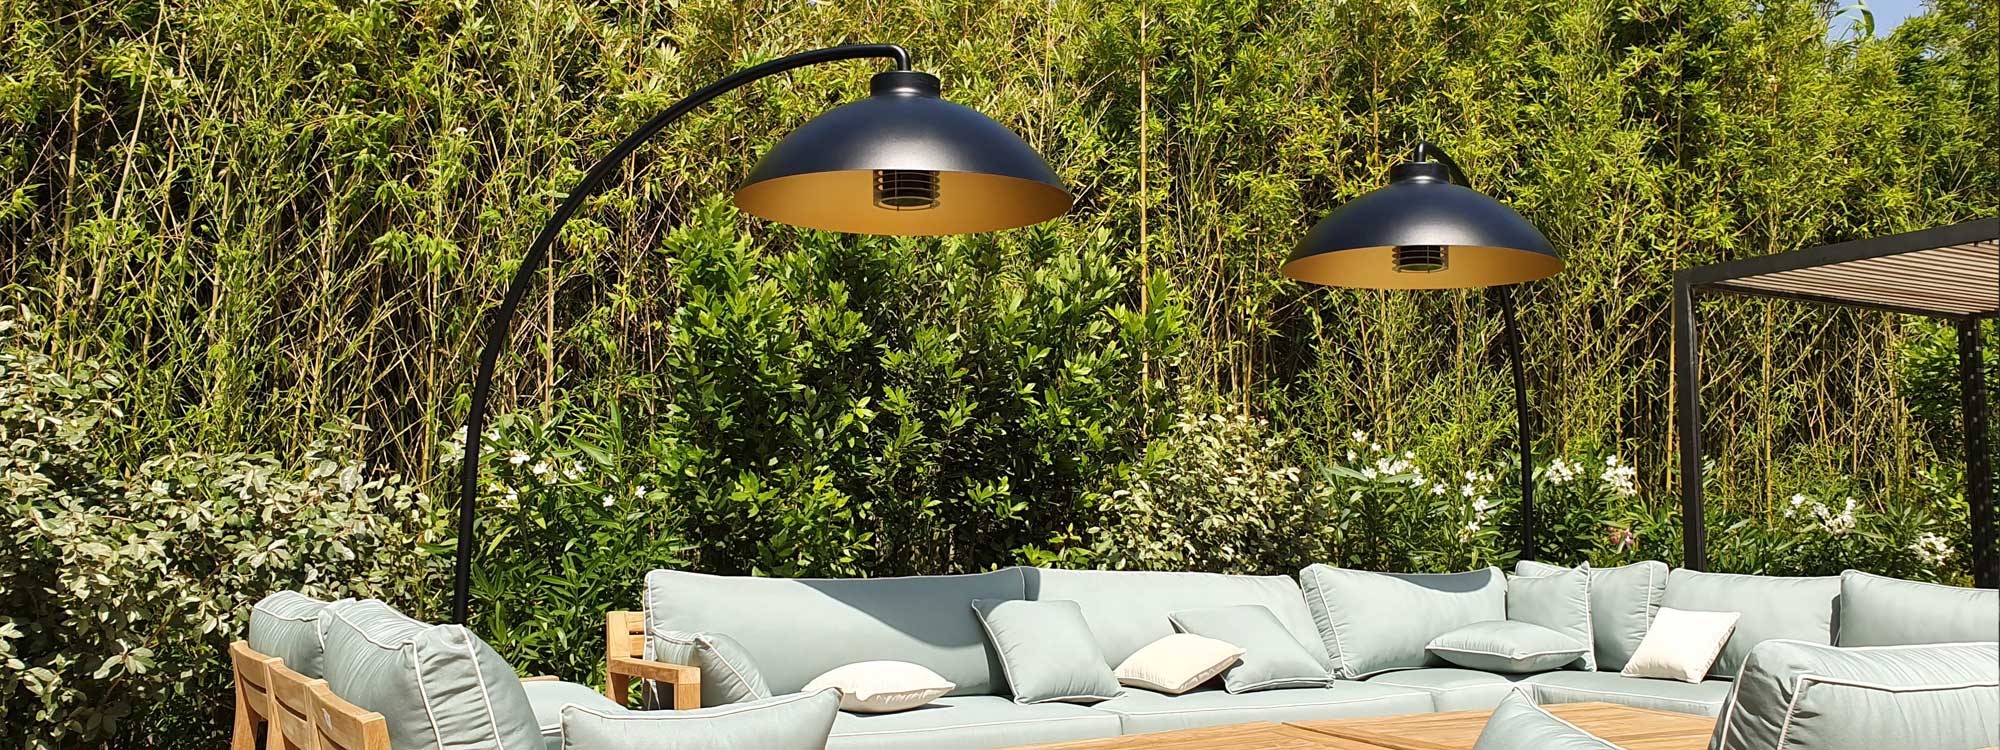 Image of pair of Dome electric patio heaters by Heatsail over large teak garden sofa on a sunny patio